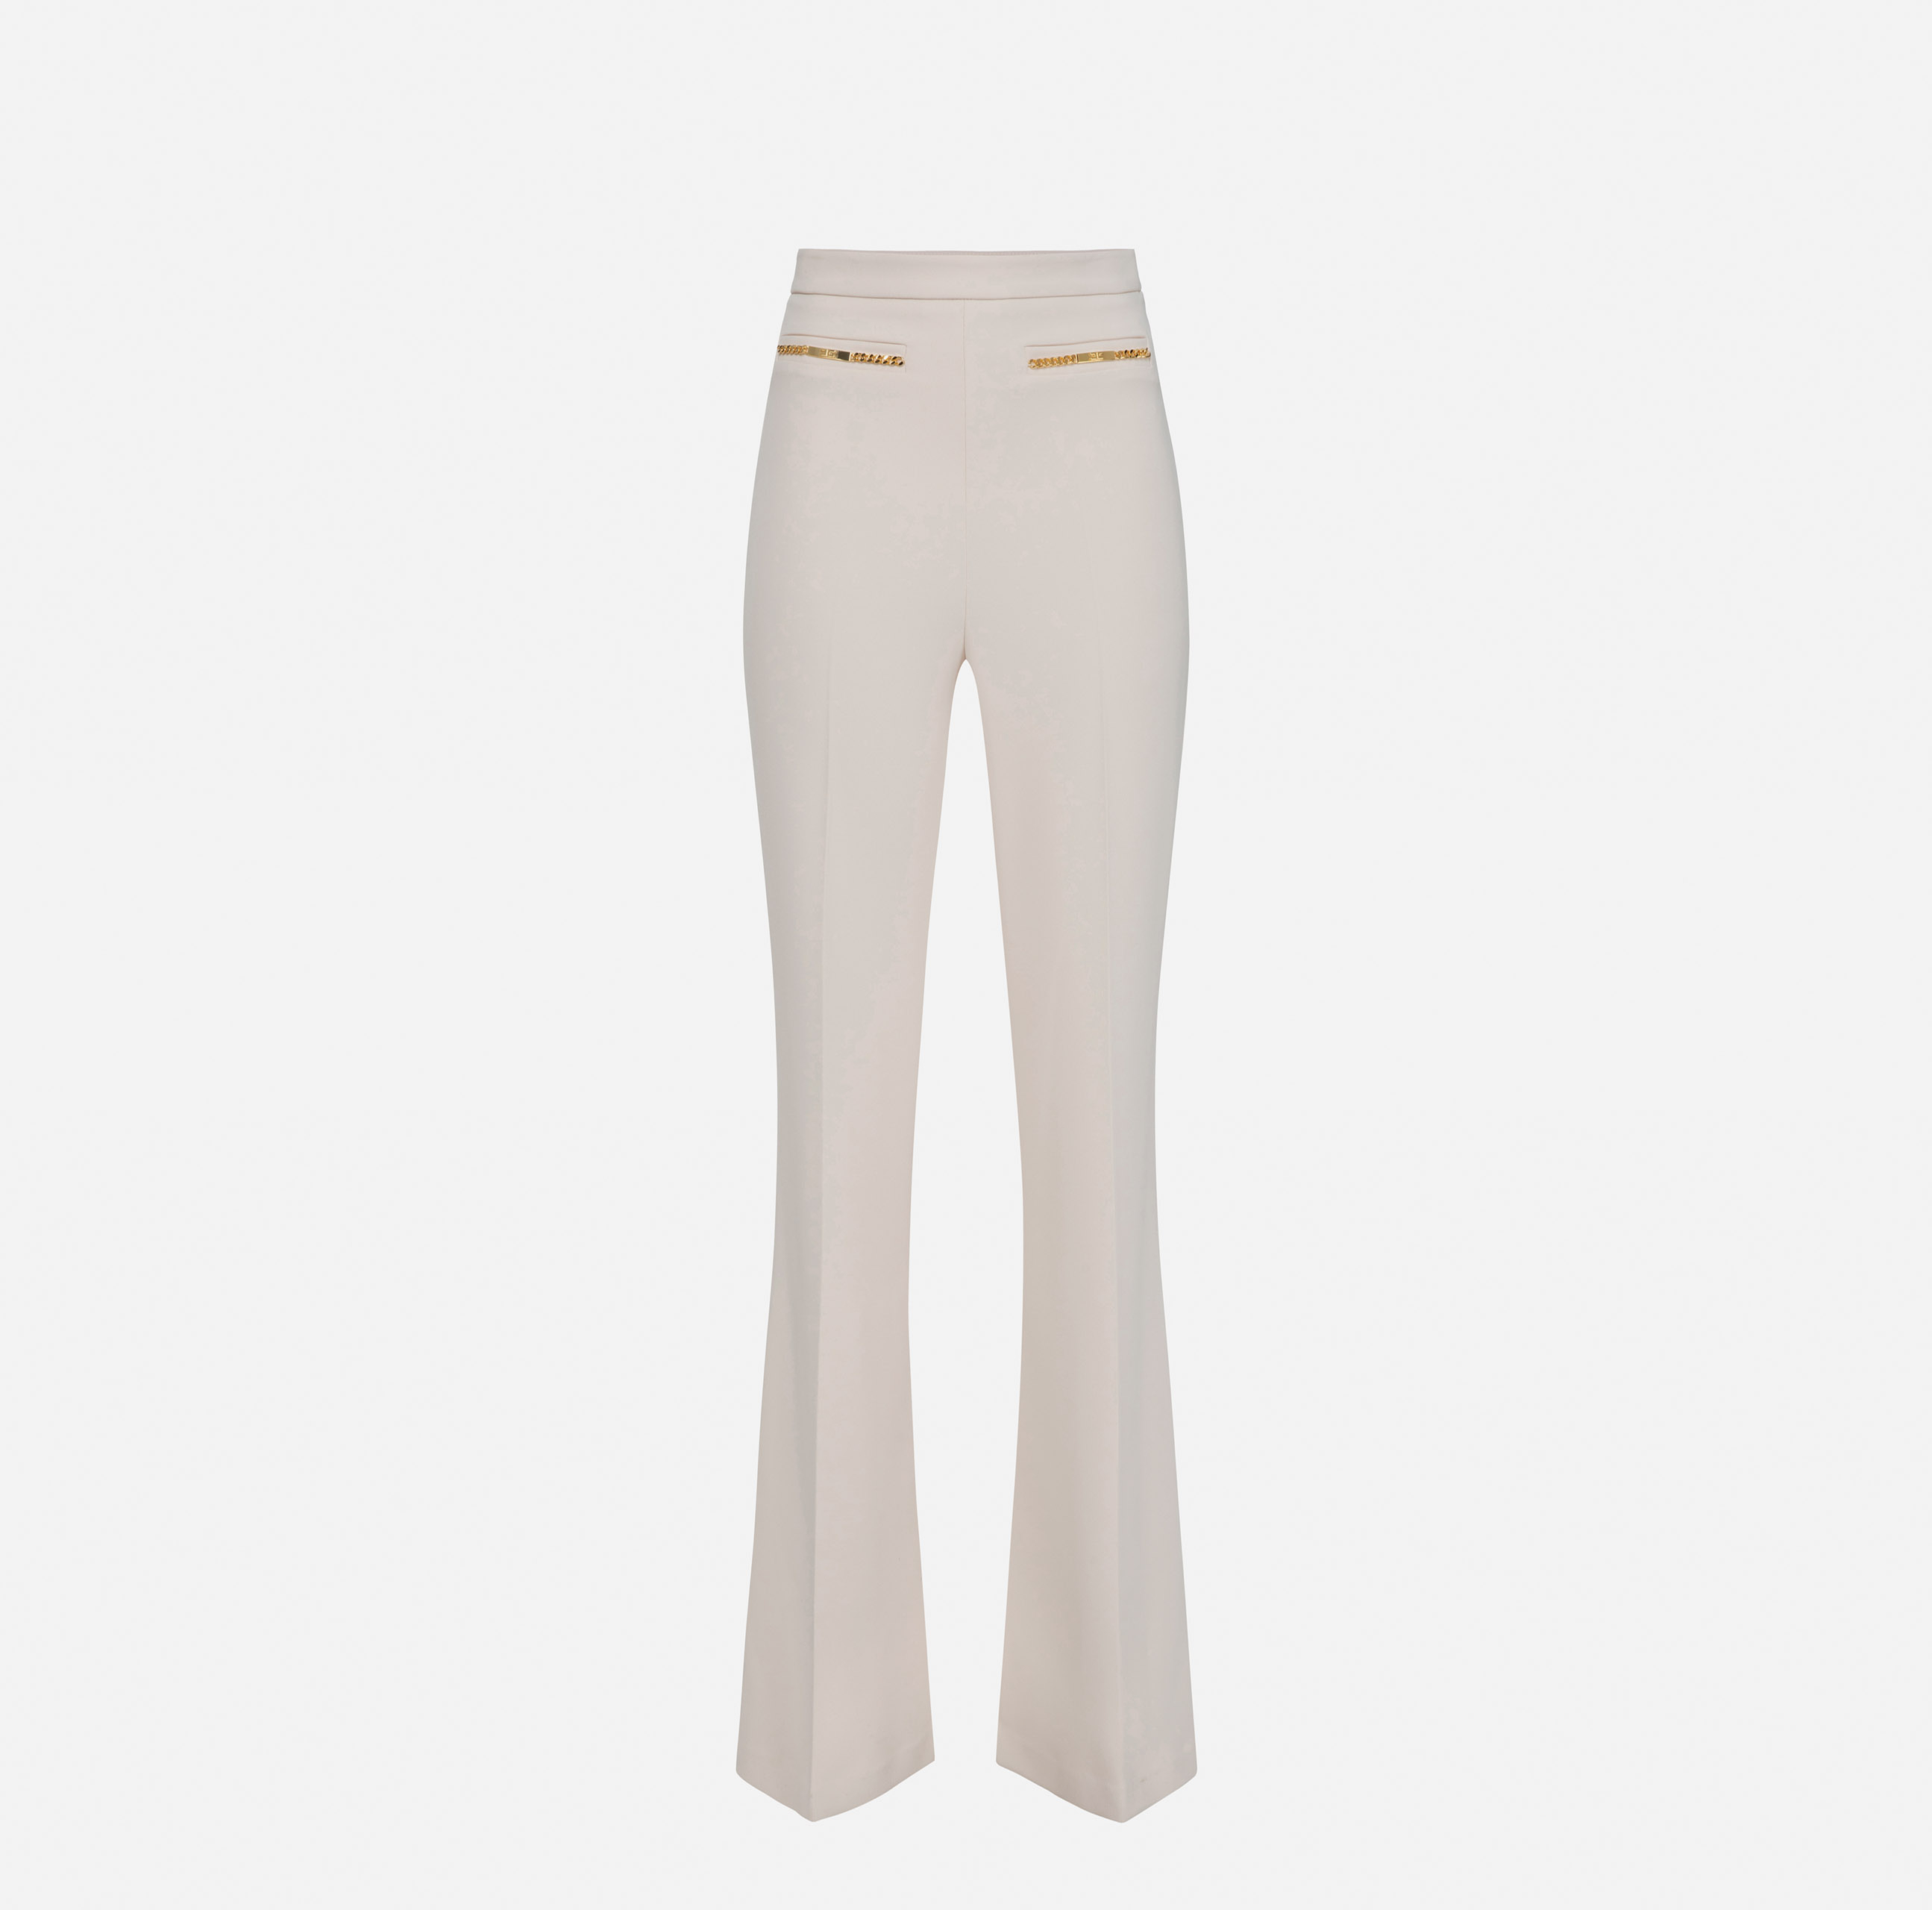 Palazzo trousers in crêpe fabric with horsebits - Elisabetta Franchi